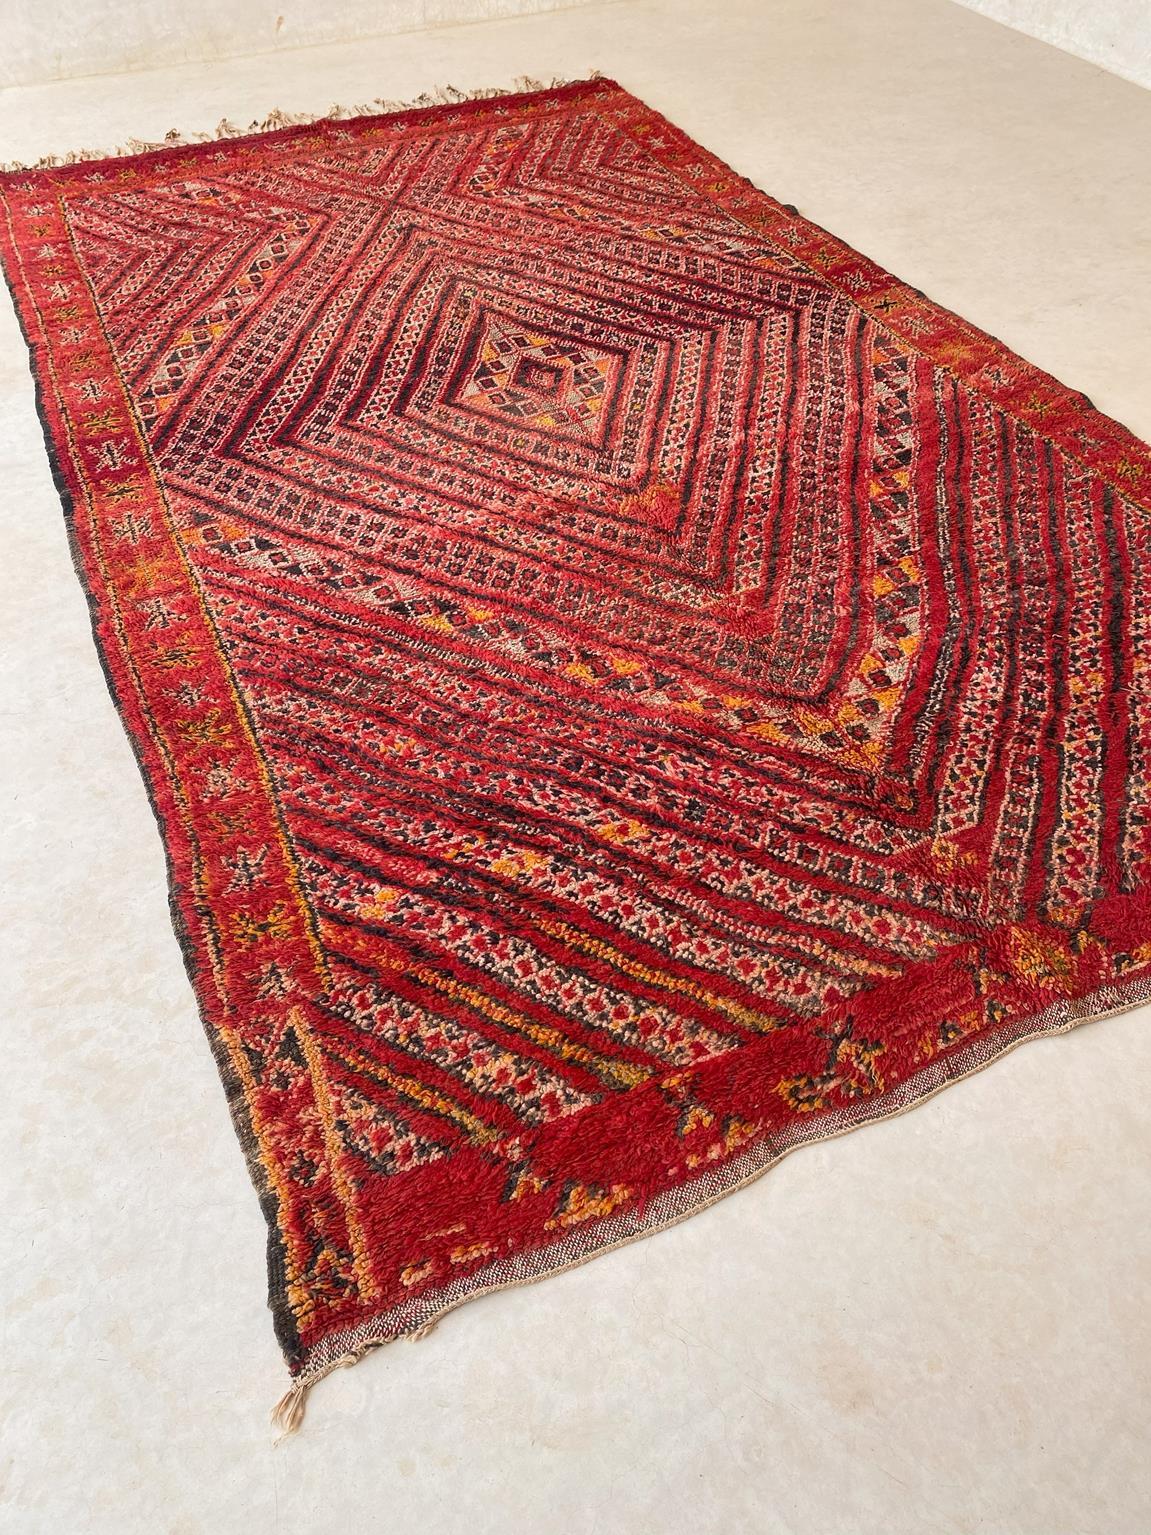 Tribal Vintage Moroccan Zayane rug - Red - 6.7x11.3feet / 205x344cm For Sale